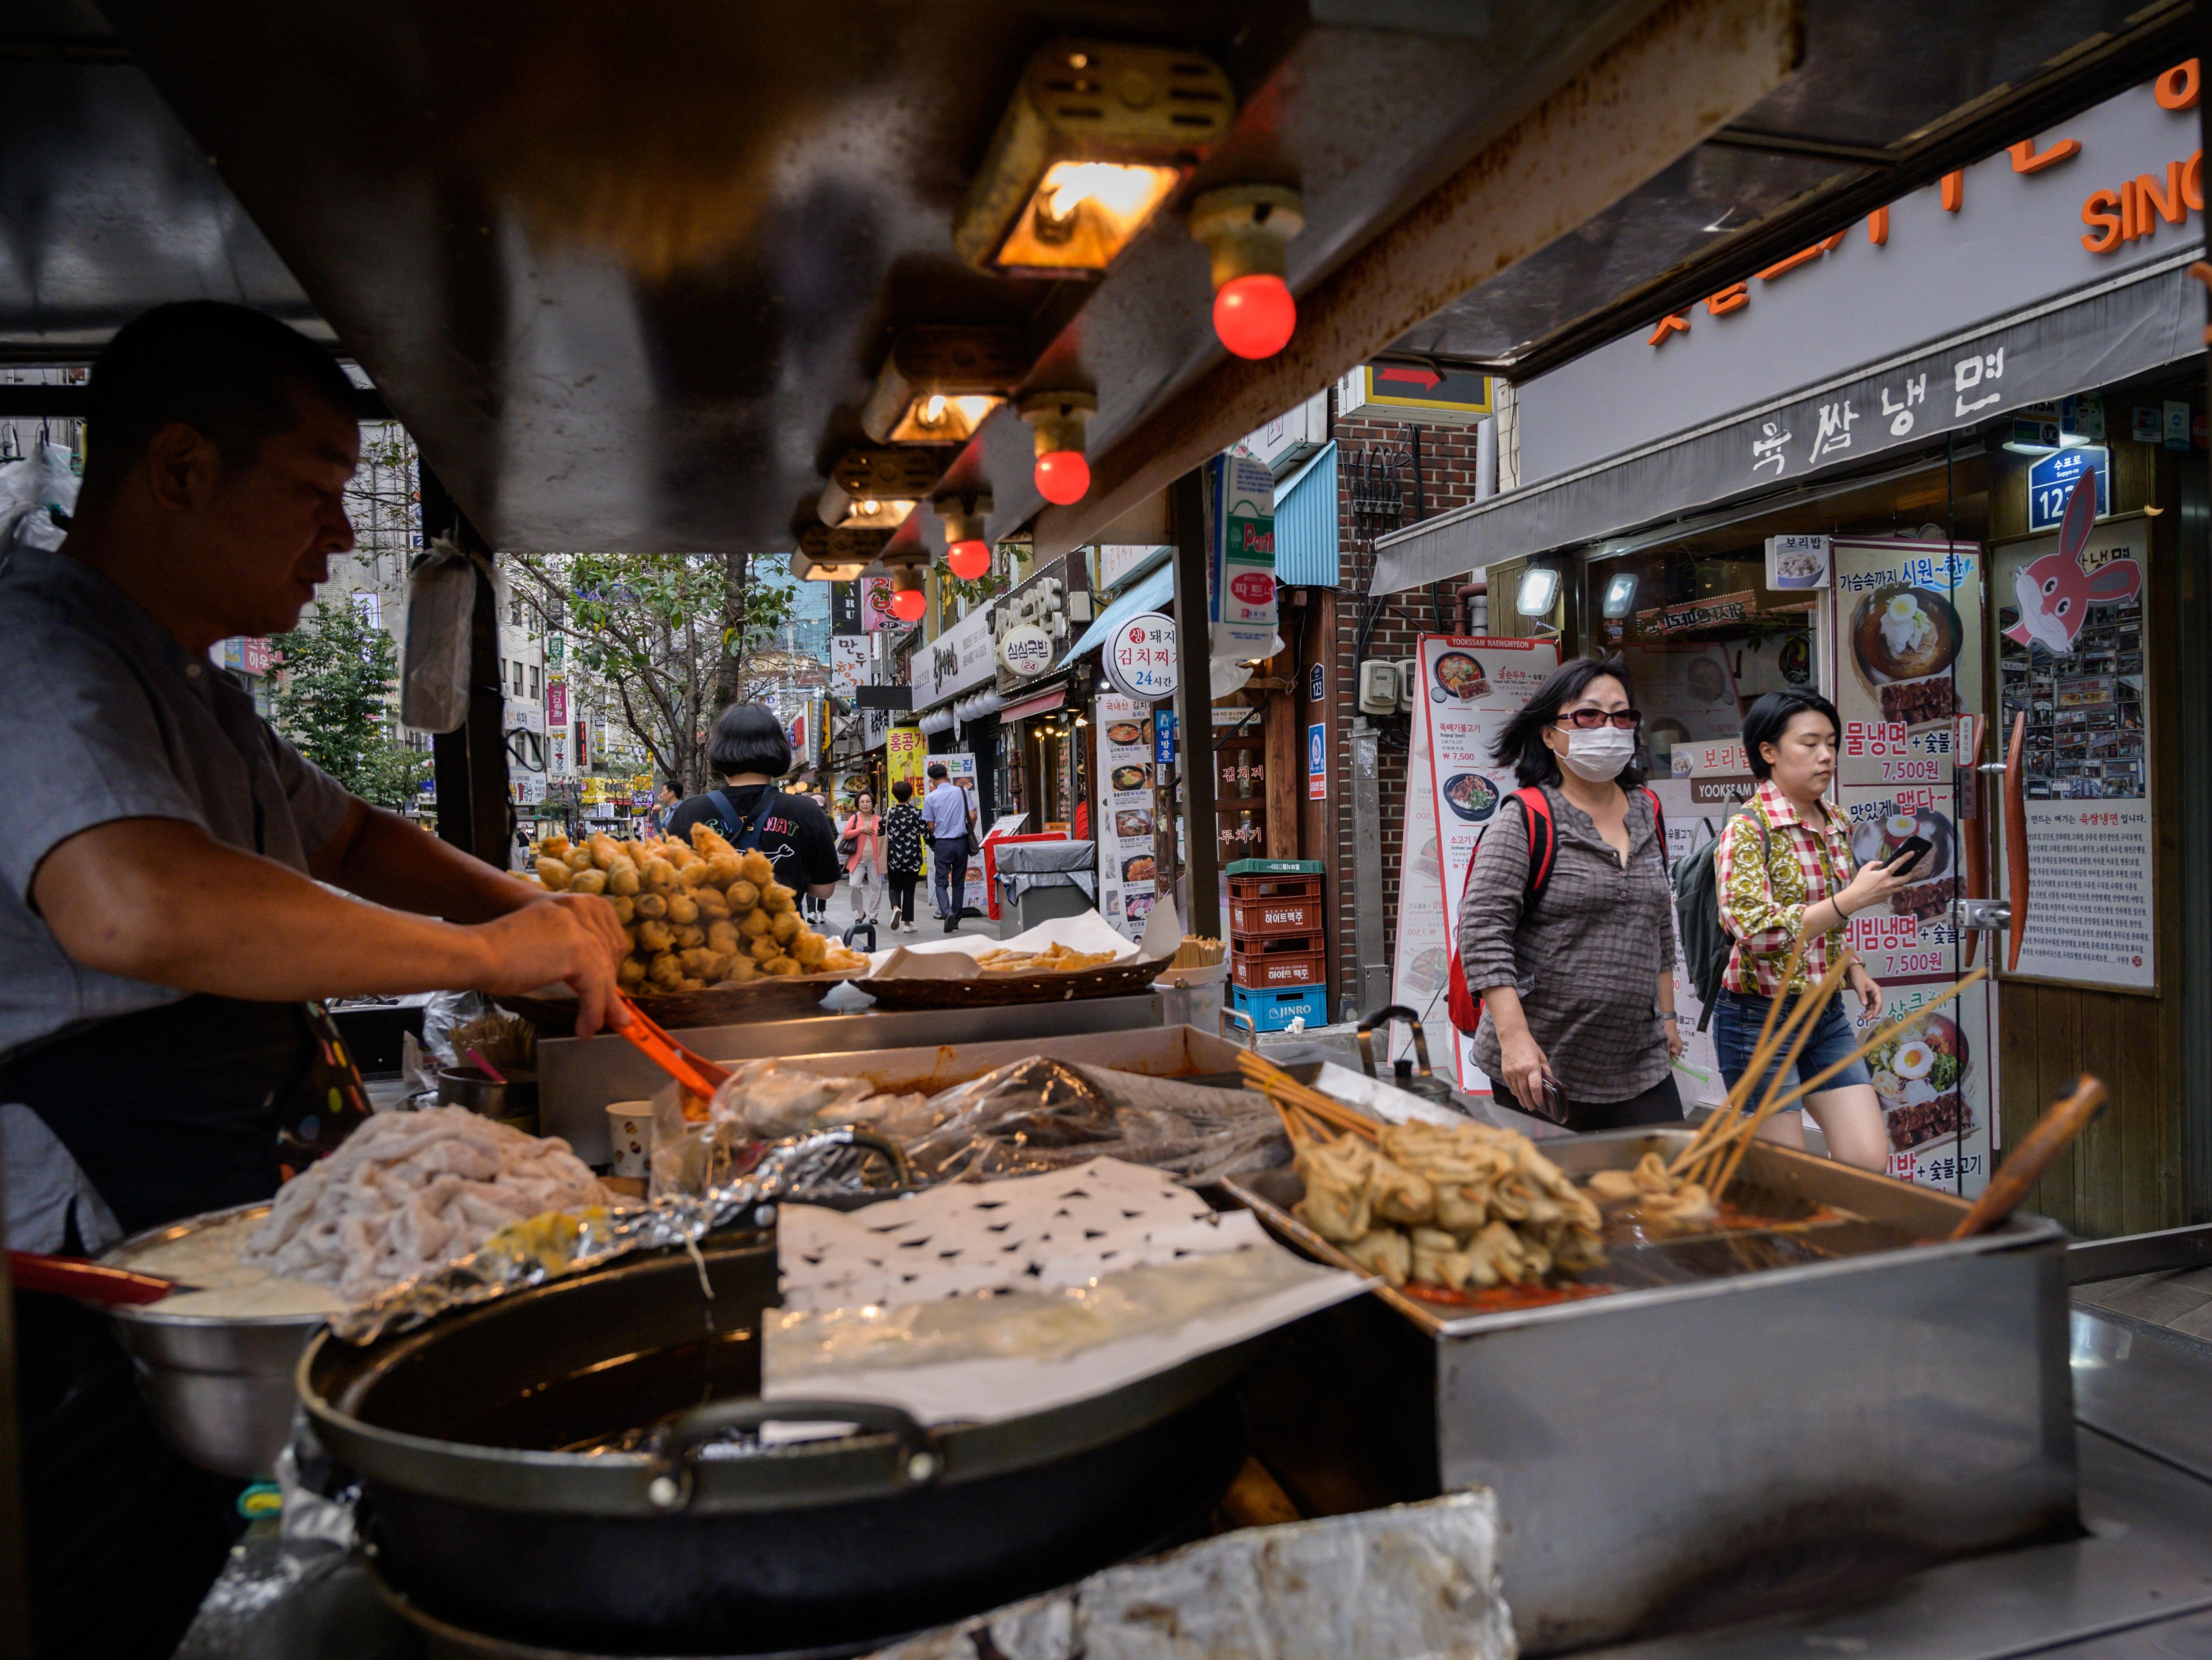 Representational image: A snack vendor prepares food at a stall on a street in Seoul